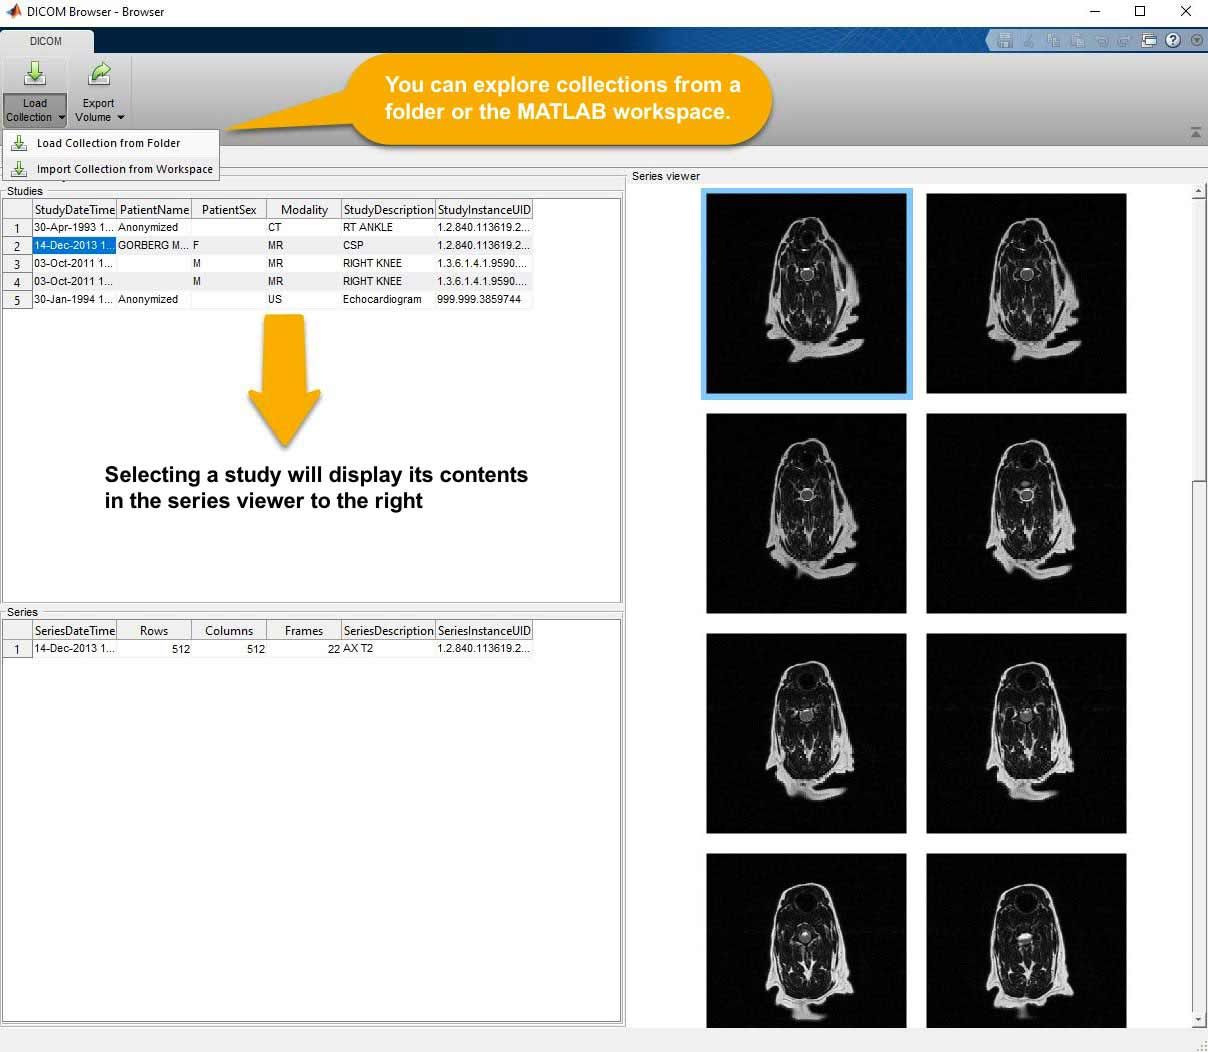 The DICOM Browser app allows you to explore collections of DICOM files and then export the data to other MATLAB apps or the workspace.